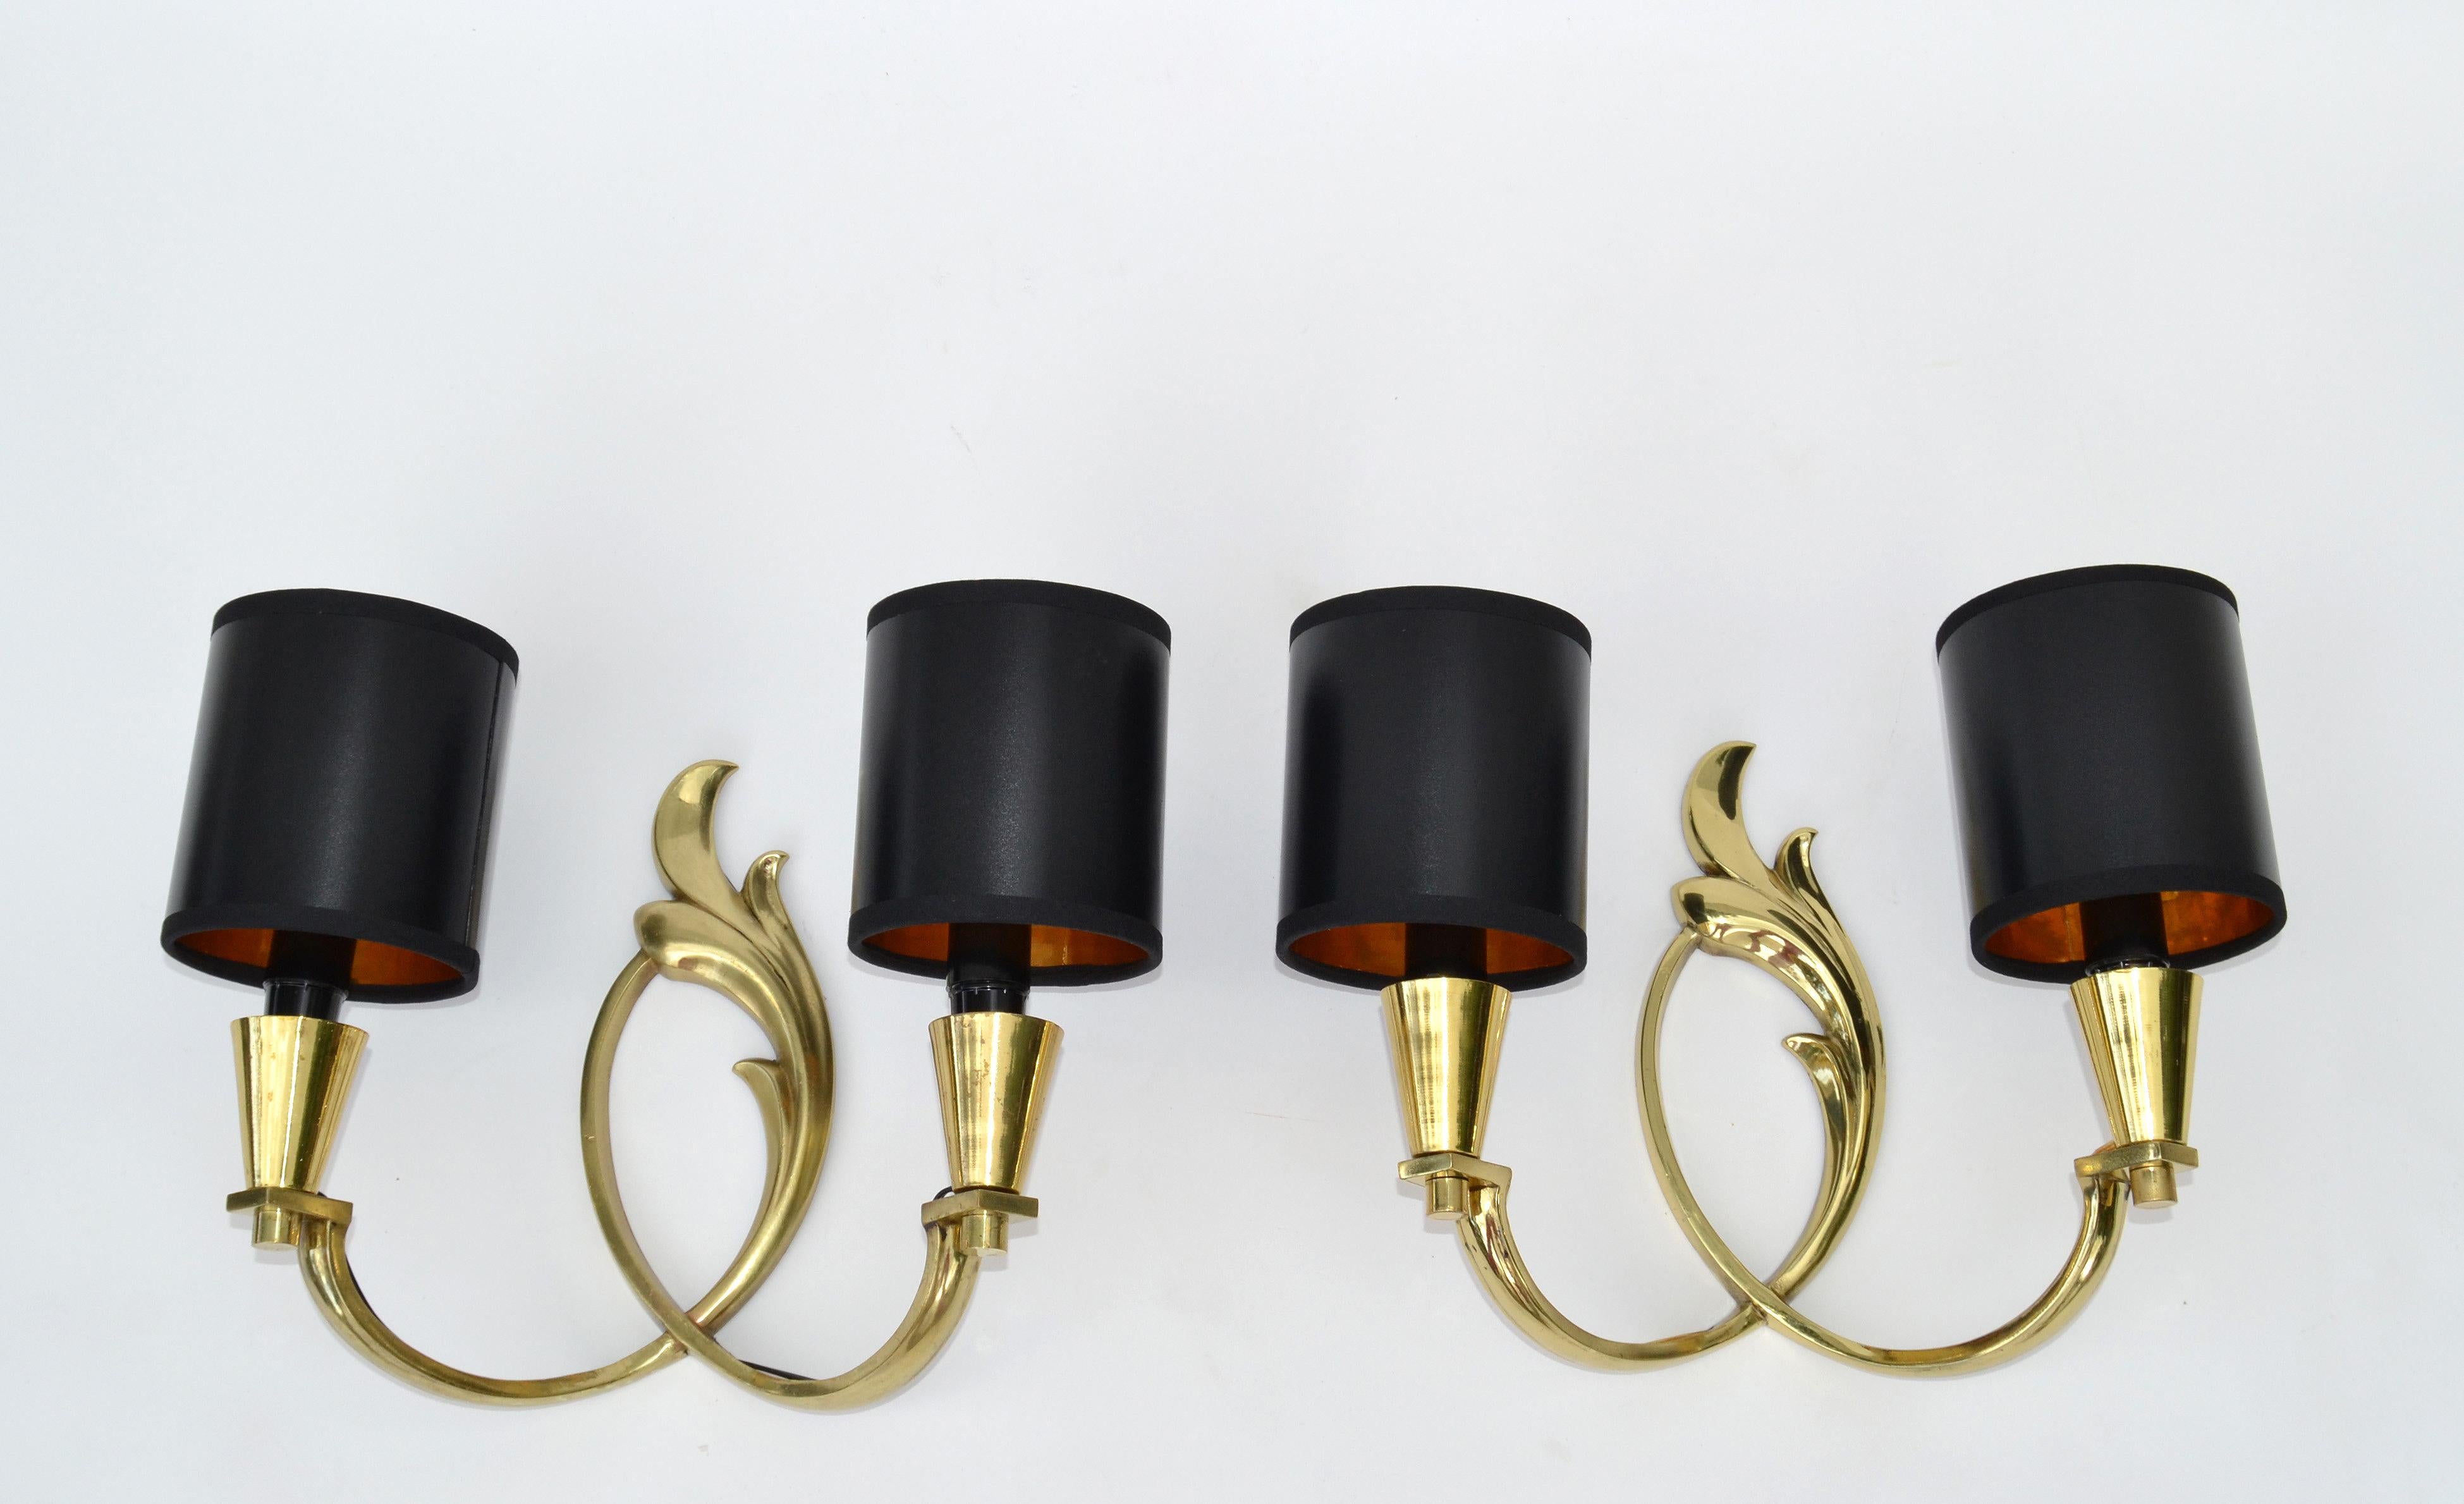 Superb pair of Scarpa bronze sconces
2 lights, 60 watts max per bulb.
US rewired and in working condition.
Custom backplate available.
2 pairs available.